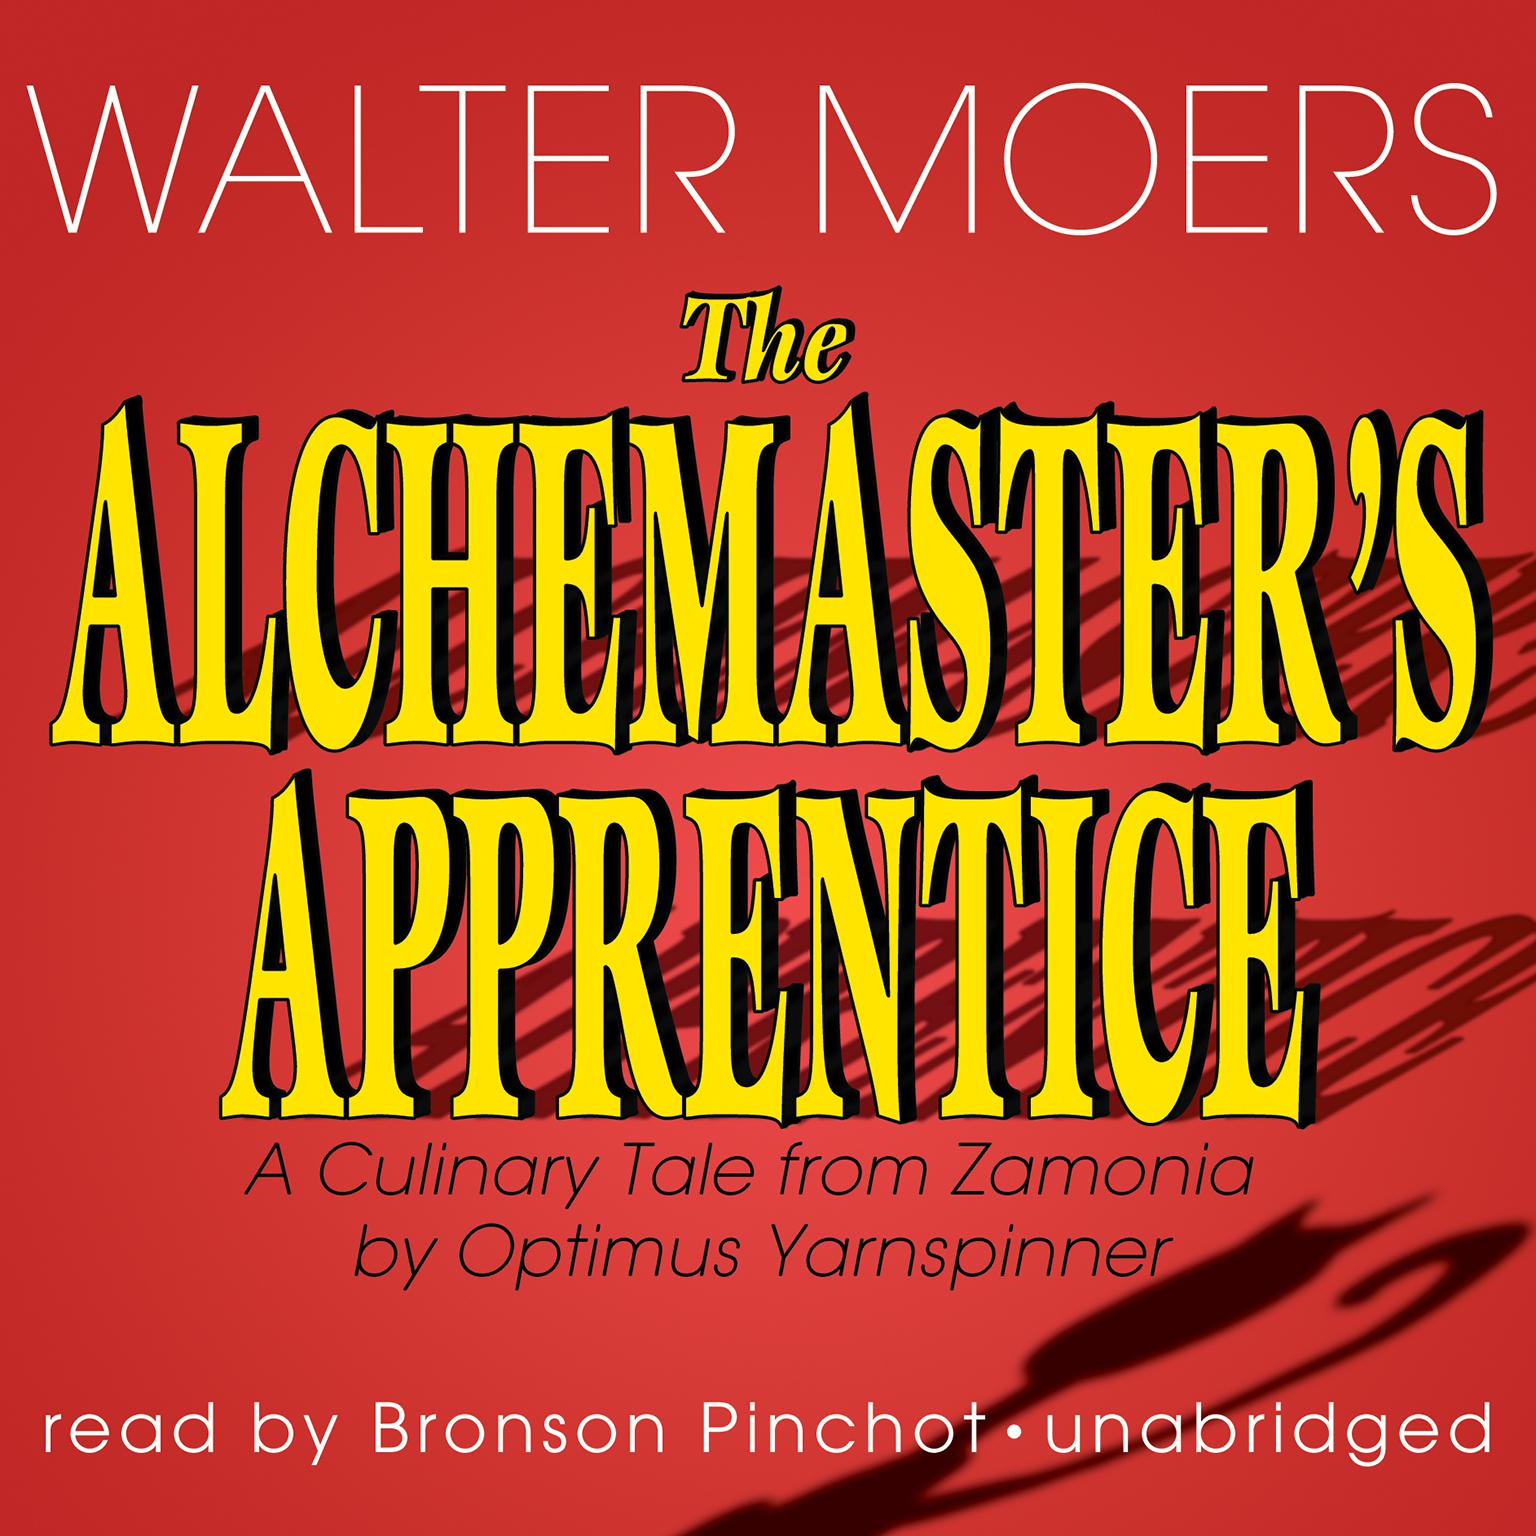 The Alchemaster’s Apprentice: A Culinary Tale from Zamonia by Optimus Yarnspinner Audiobook, by Walter Moers